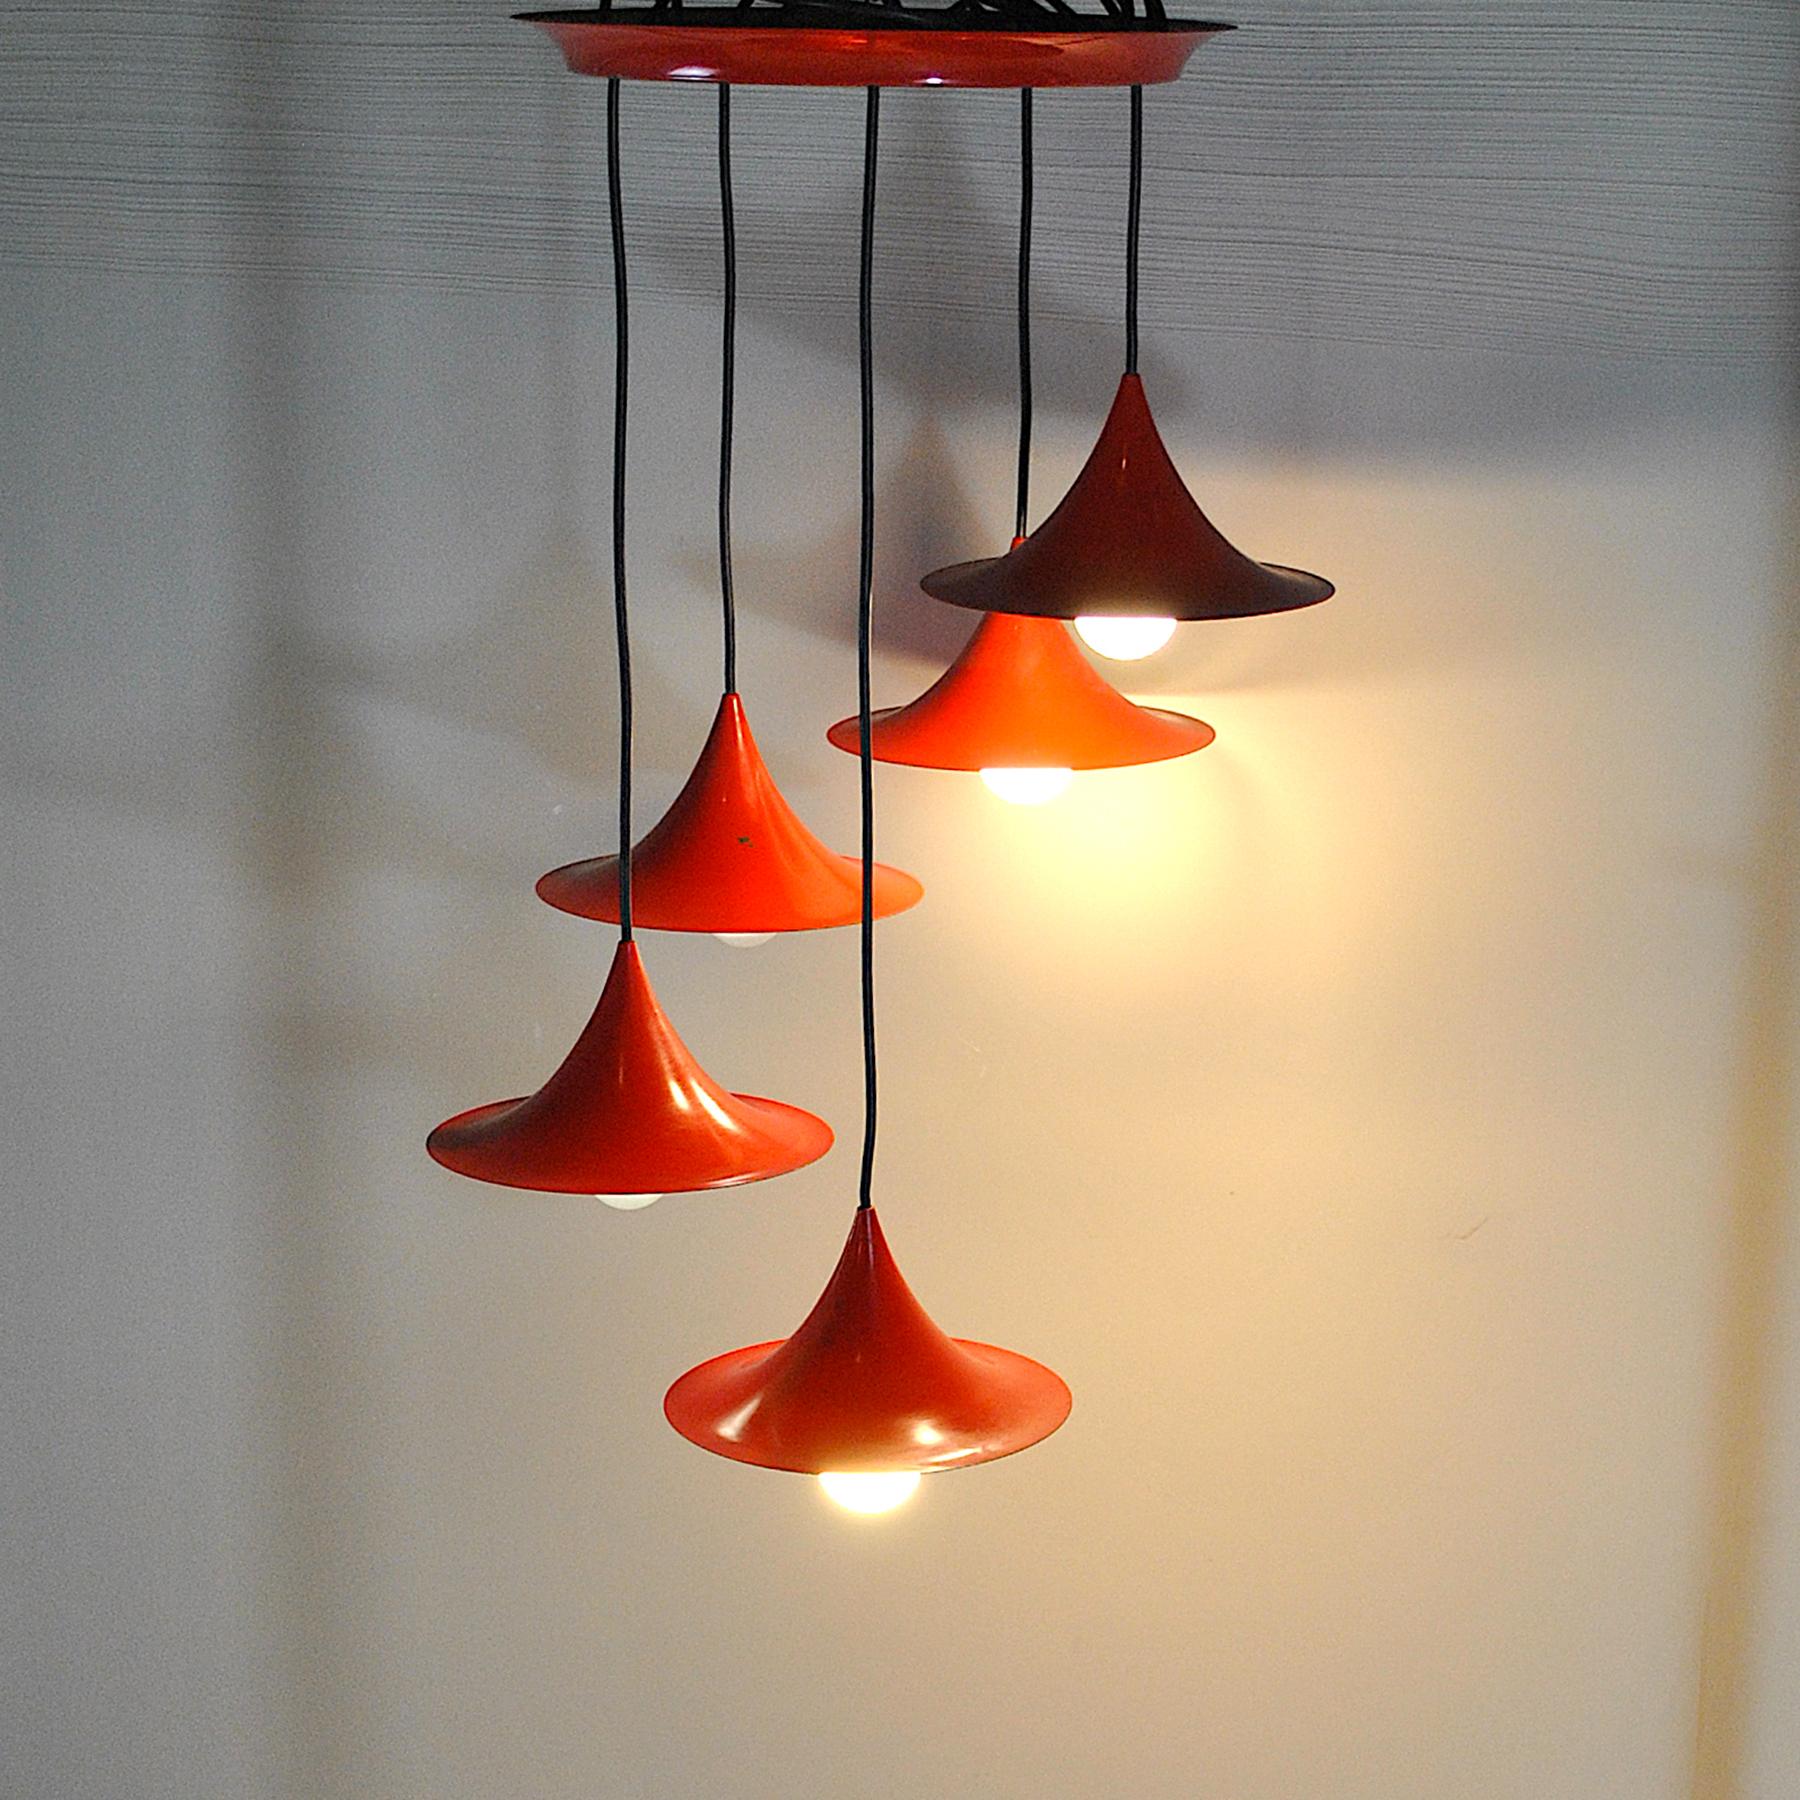 Metal Fog Mørup Celling Lamp from the 1960s For Sale